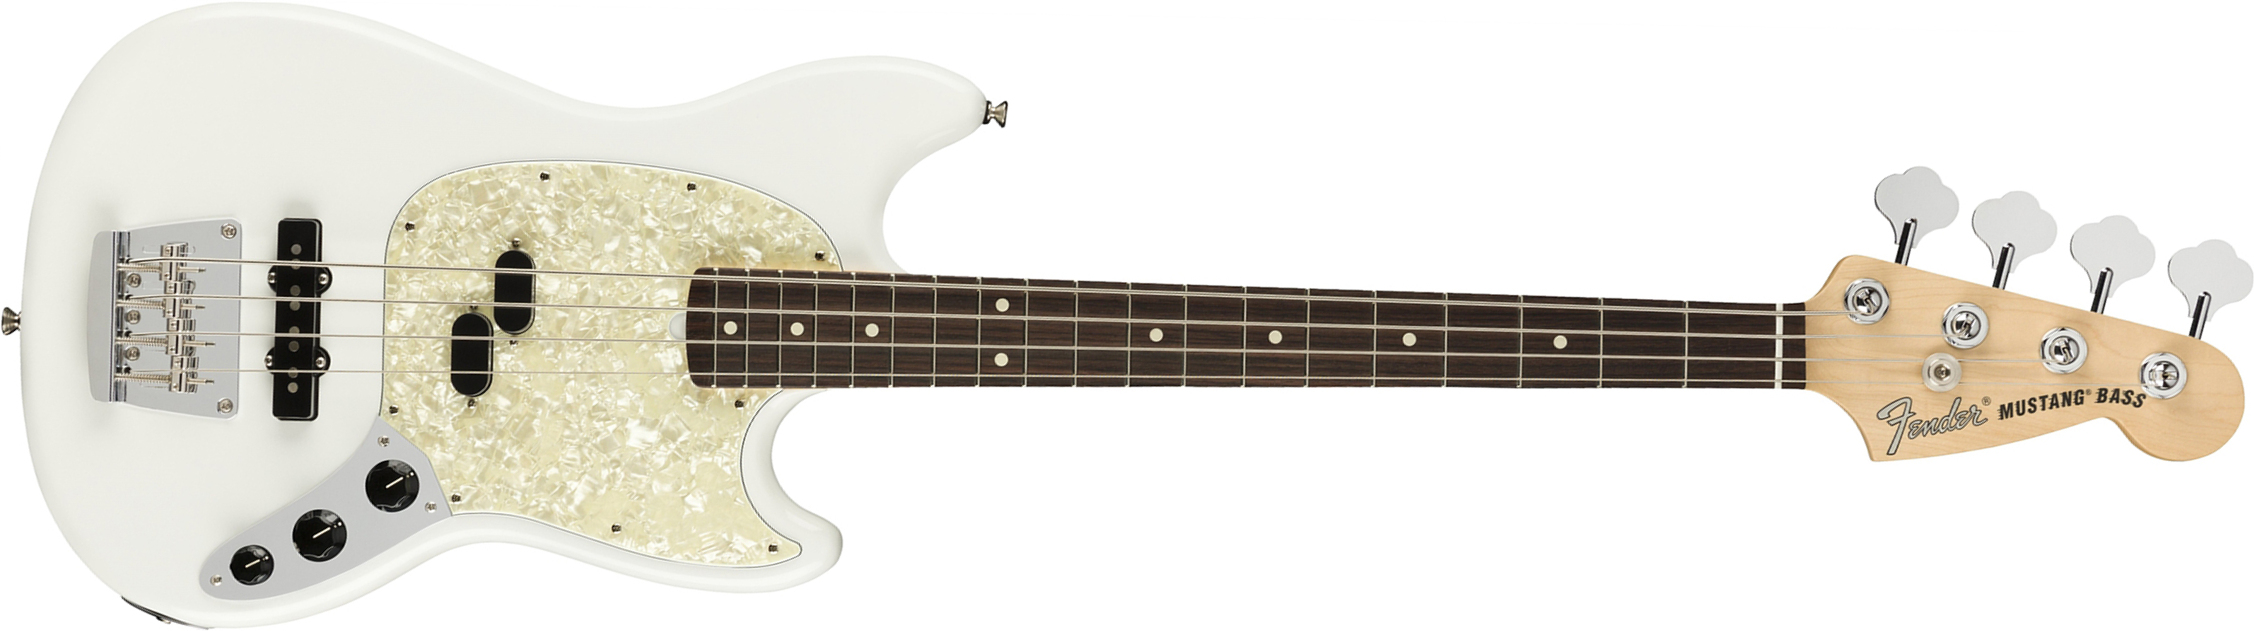 Fender Mustang Bass American Performer Usa Rw - Arctic White - E-Bass für Kinder - Main picture